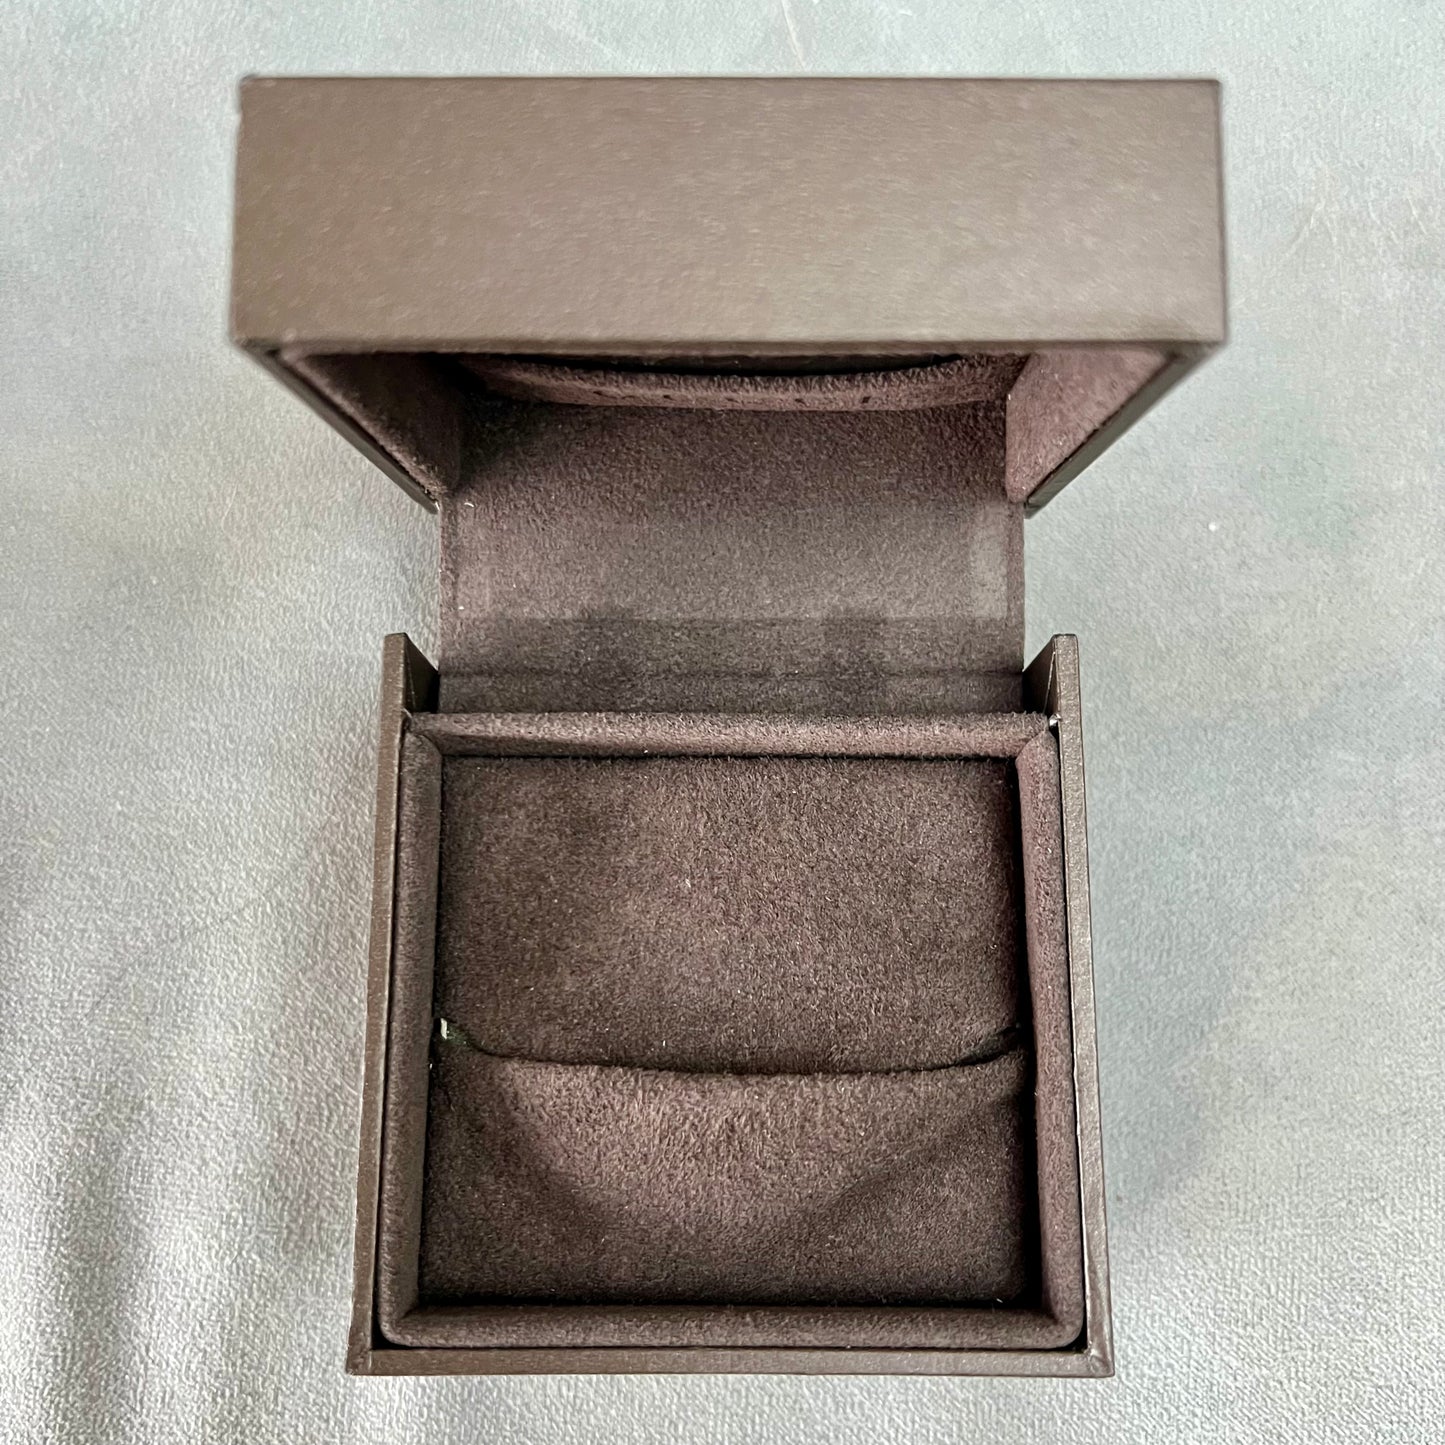 GUCCI Brown Ring Box + Outer Box